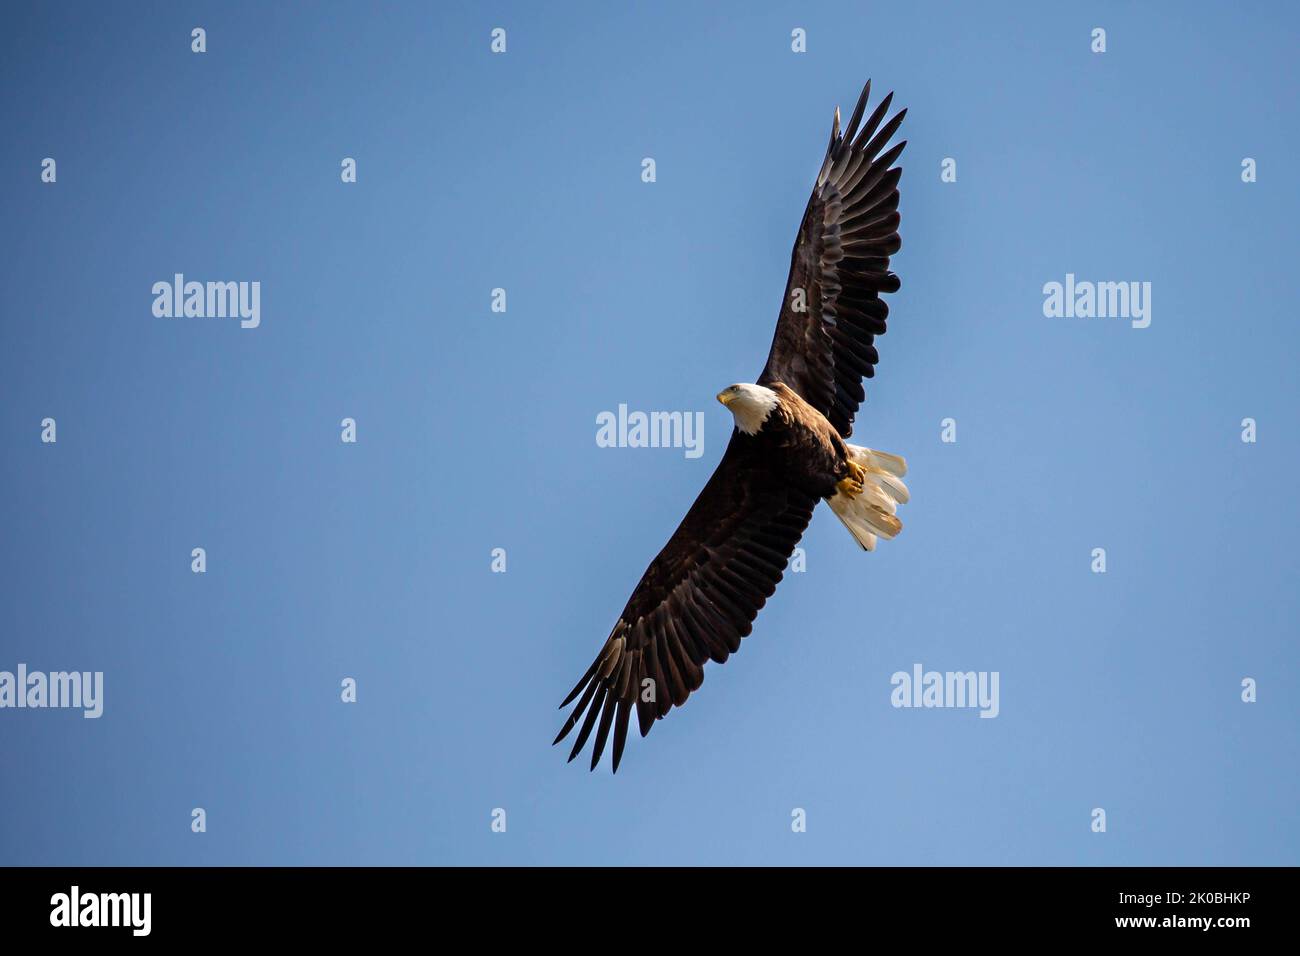 Bald Eagle (Haliaeetus leucocephalus) flying in a blue sky with copy space, horizontal Stock Photo